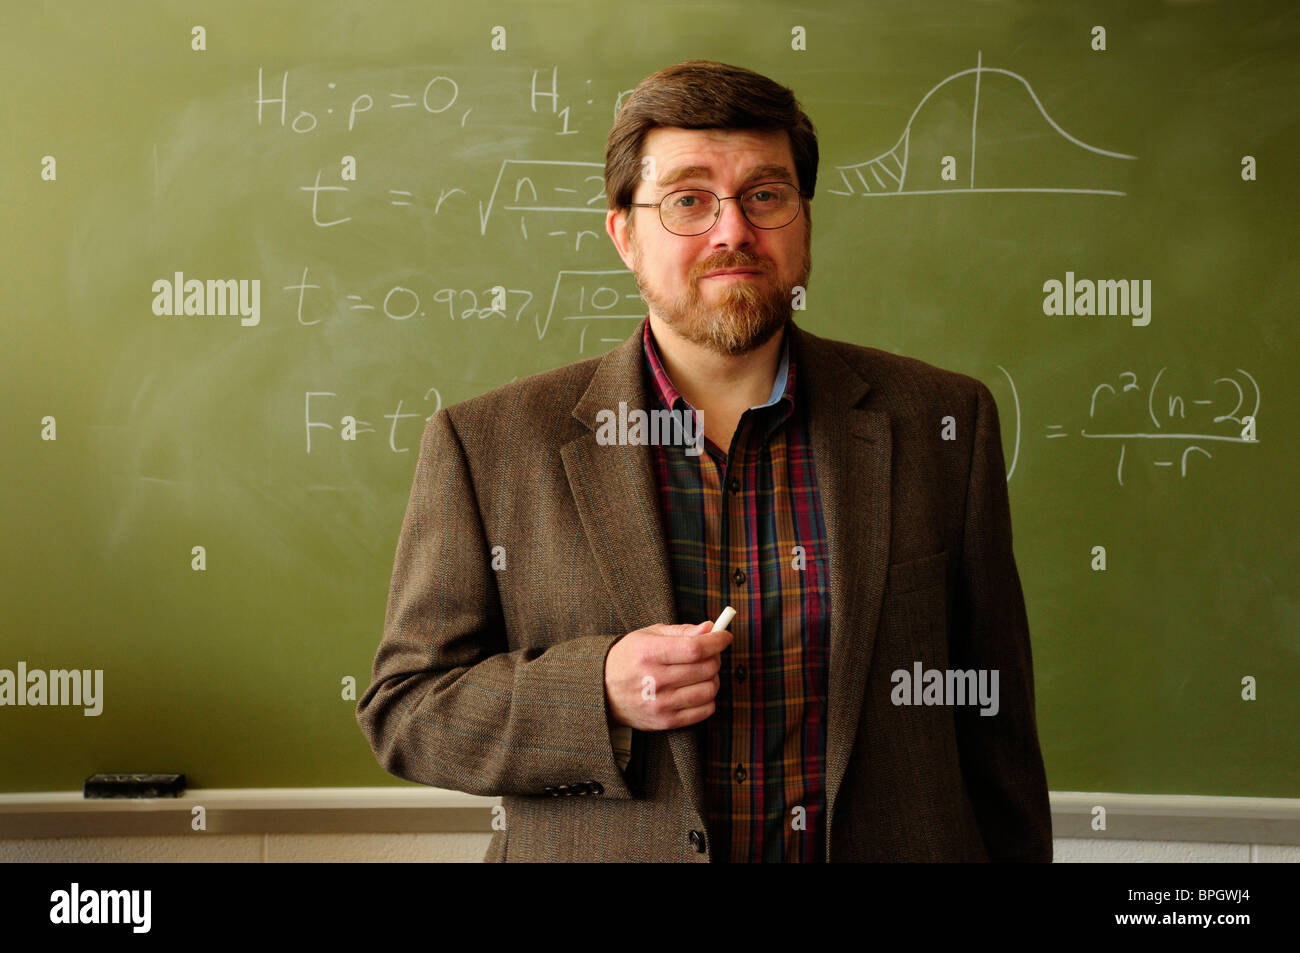 Math professor or teacher standing in a classroom, Statistical formula on chalkboard in background. Stock Photo